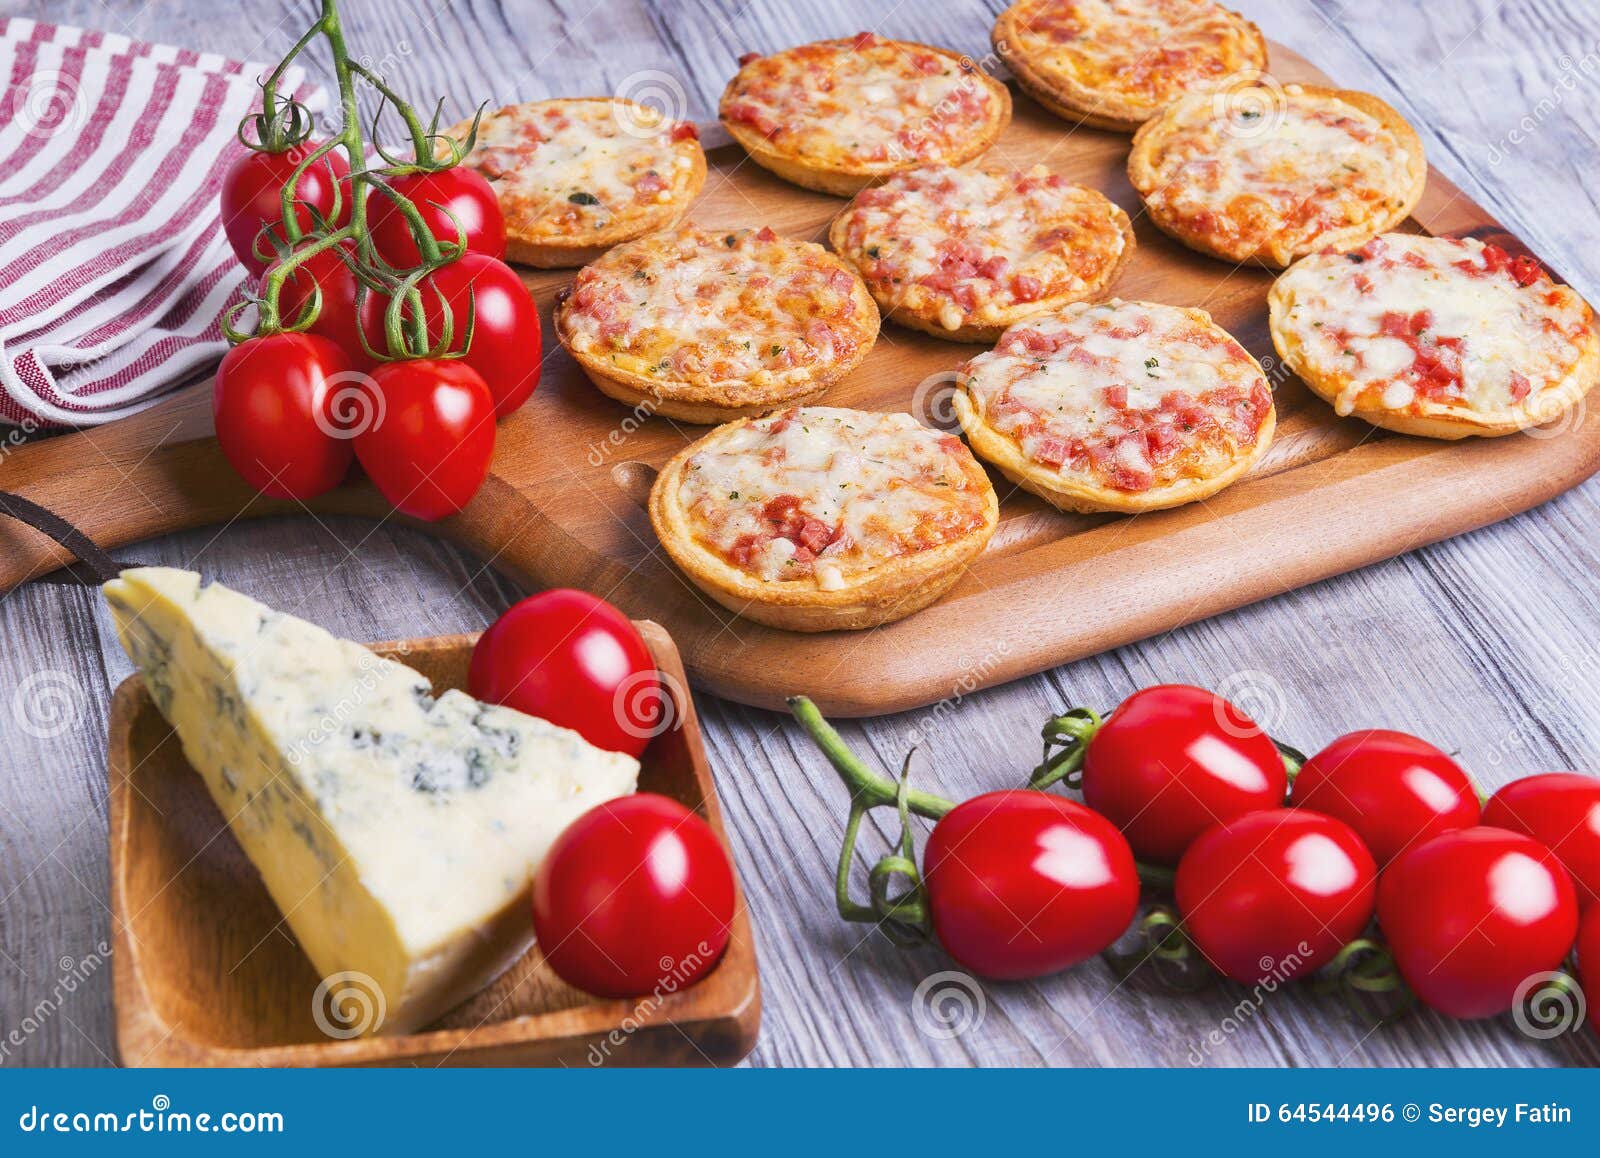 Mini Pizzas on a Wooden Table Stock Photo - Image of cooking, closeup ...